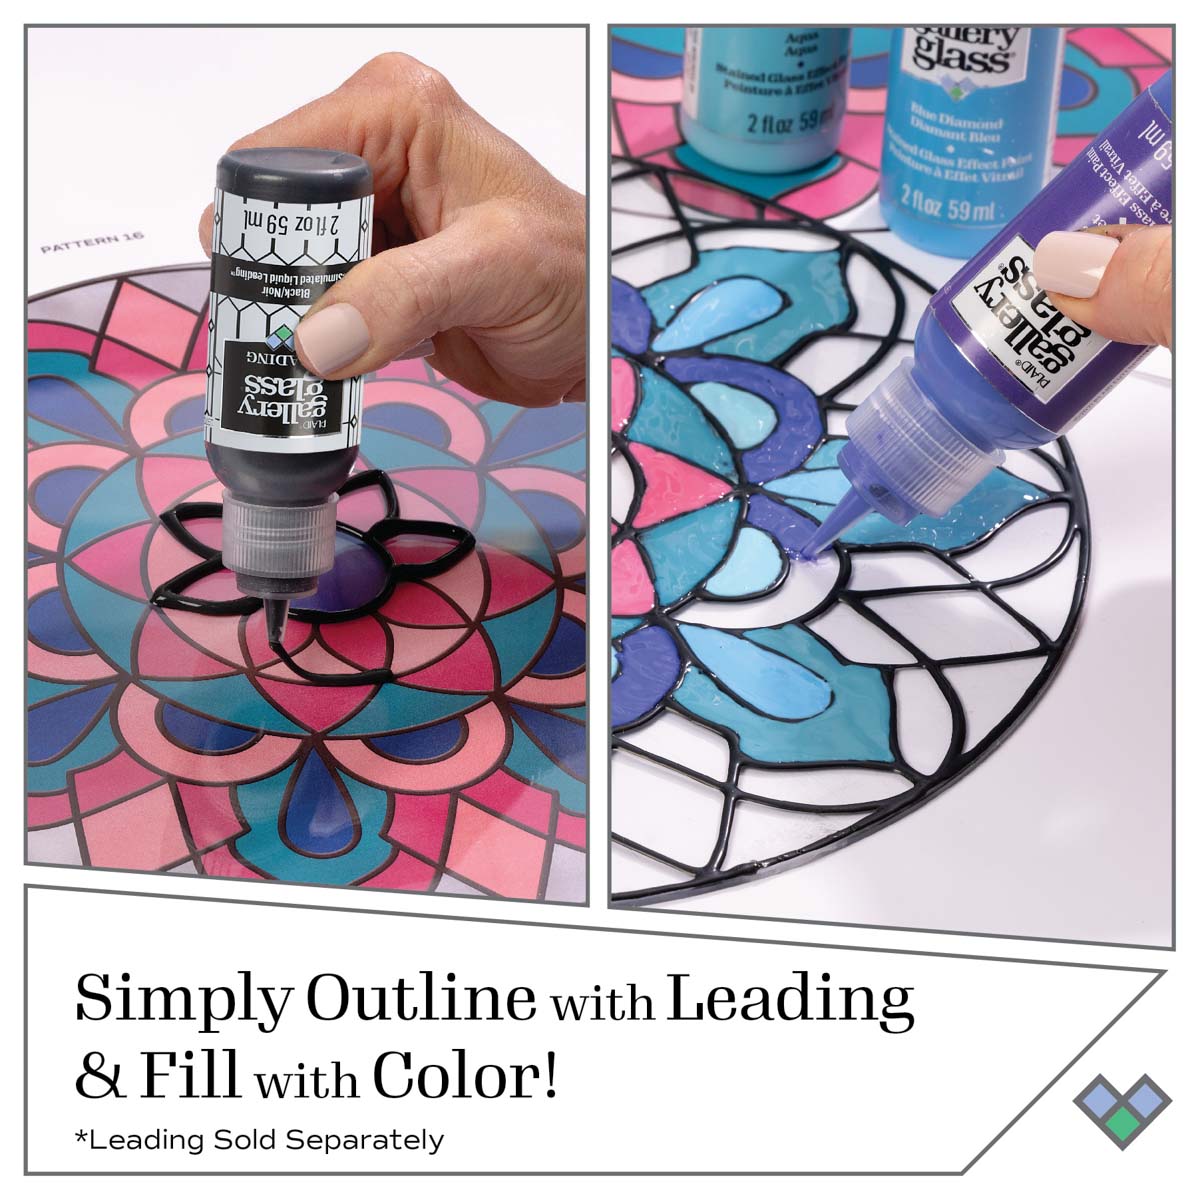 Gallery Glass ® Stained Glass Effect Paint - Cameo Ivory, 2 oz. - 20038